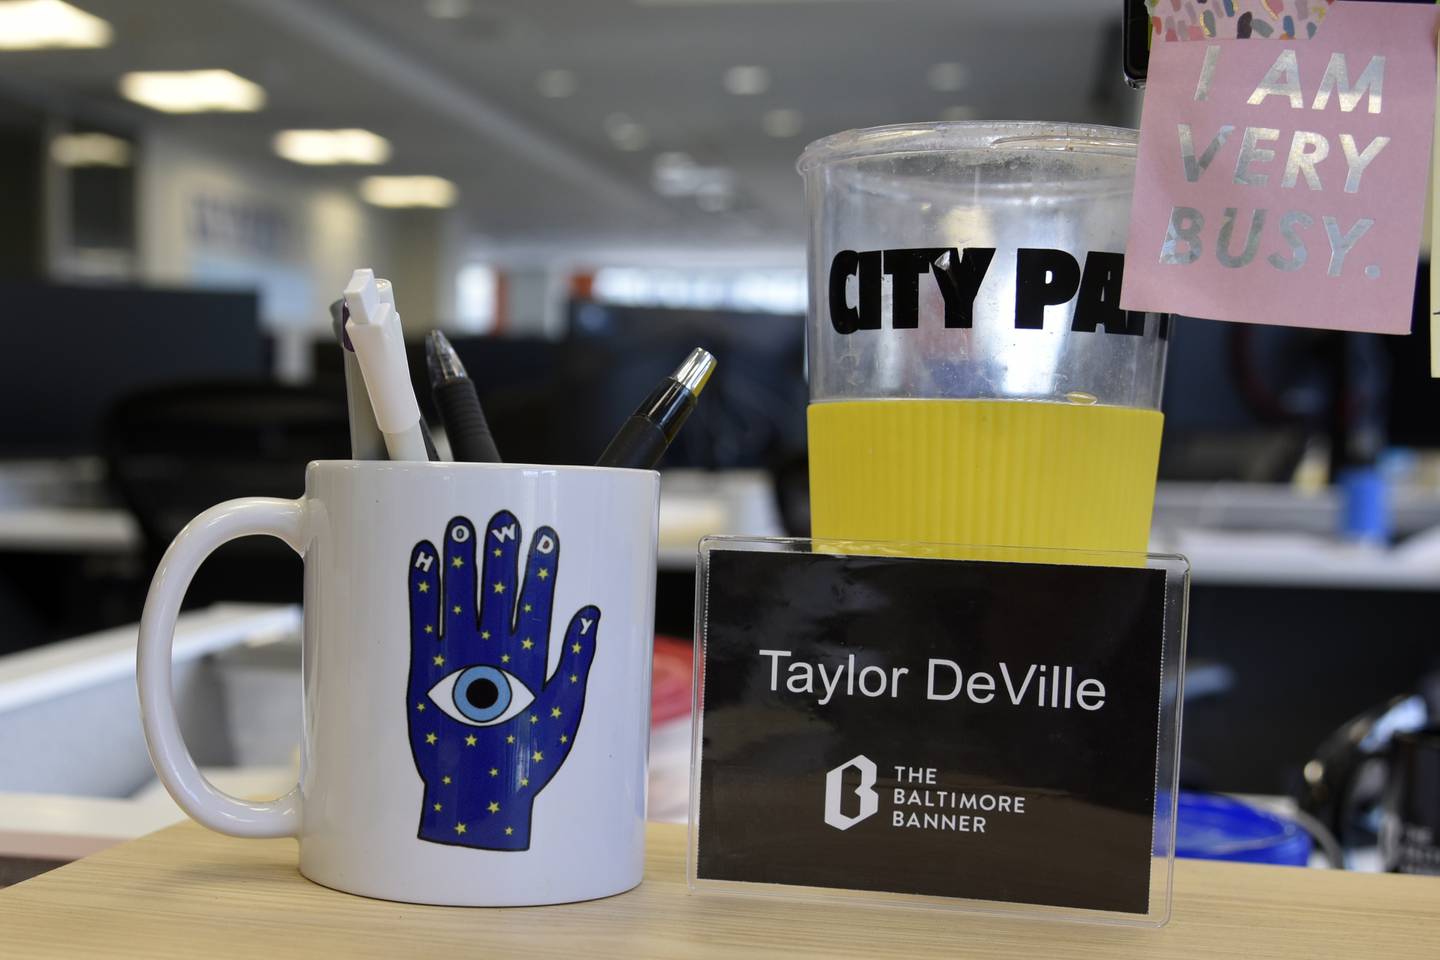 A "Howdy" mug from Sideshow at the American Visionary Art Museum adorns Baltimore Banner reporter Taylor DeVille's desk.